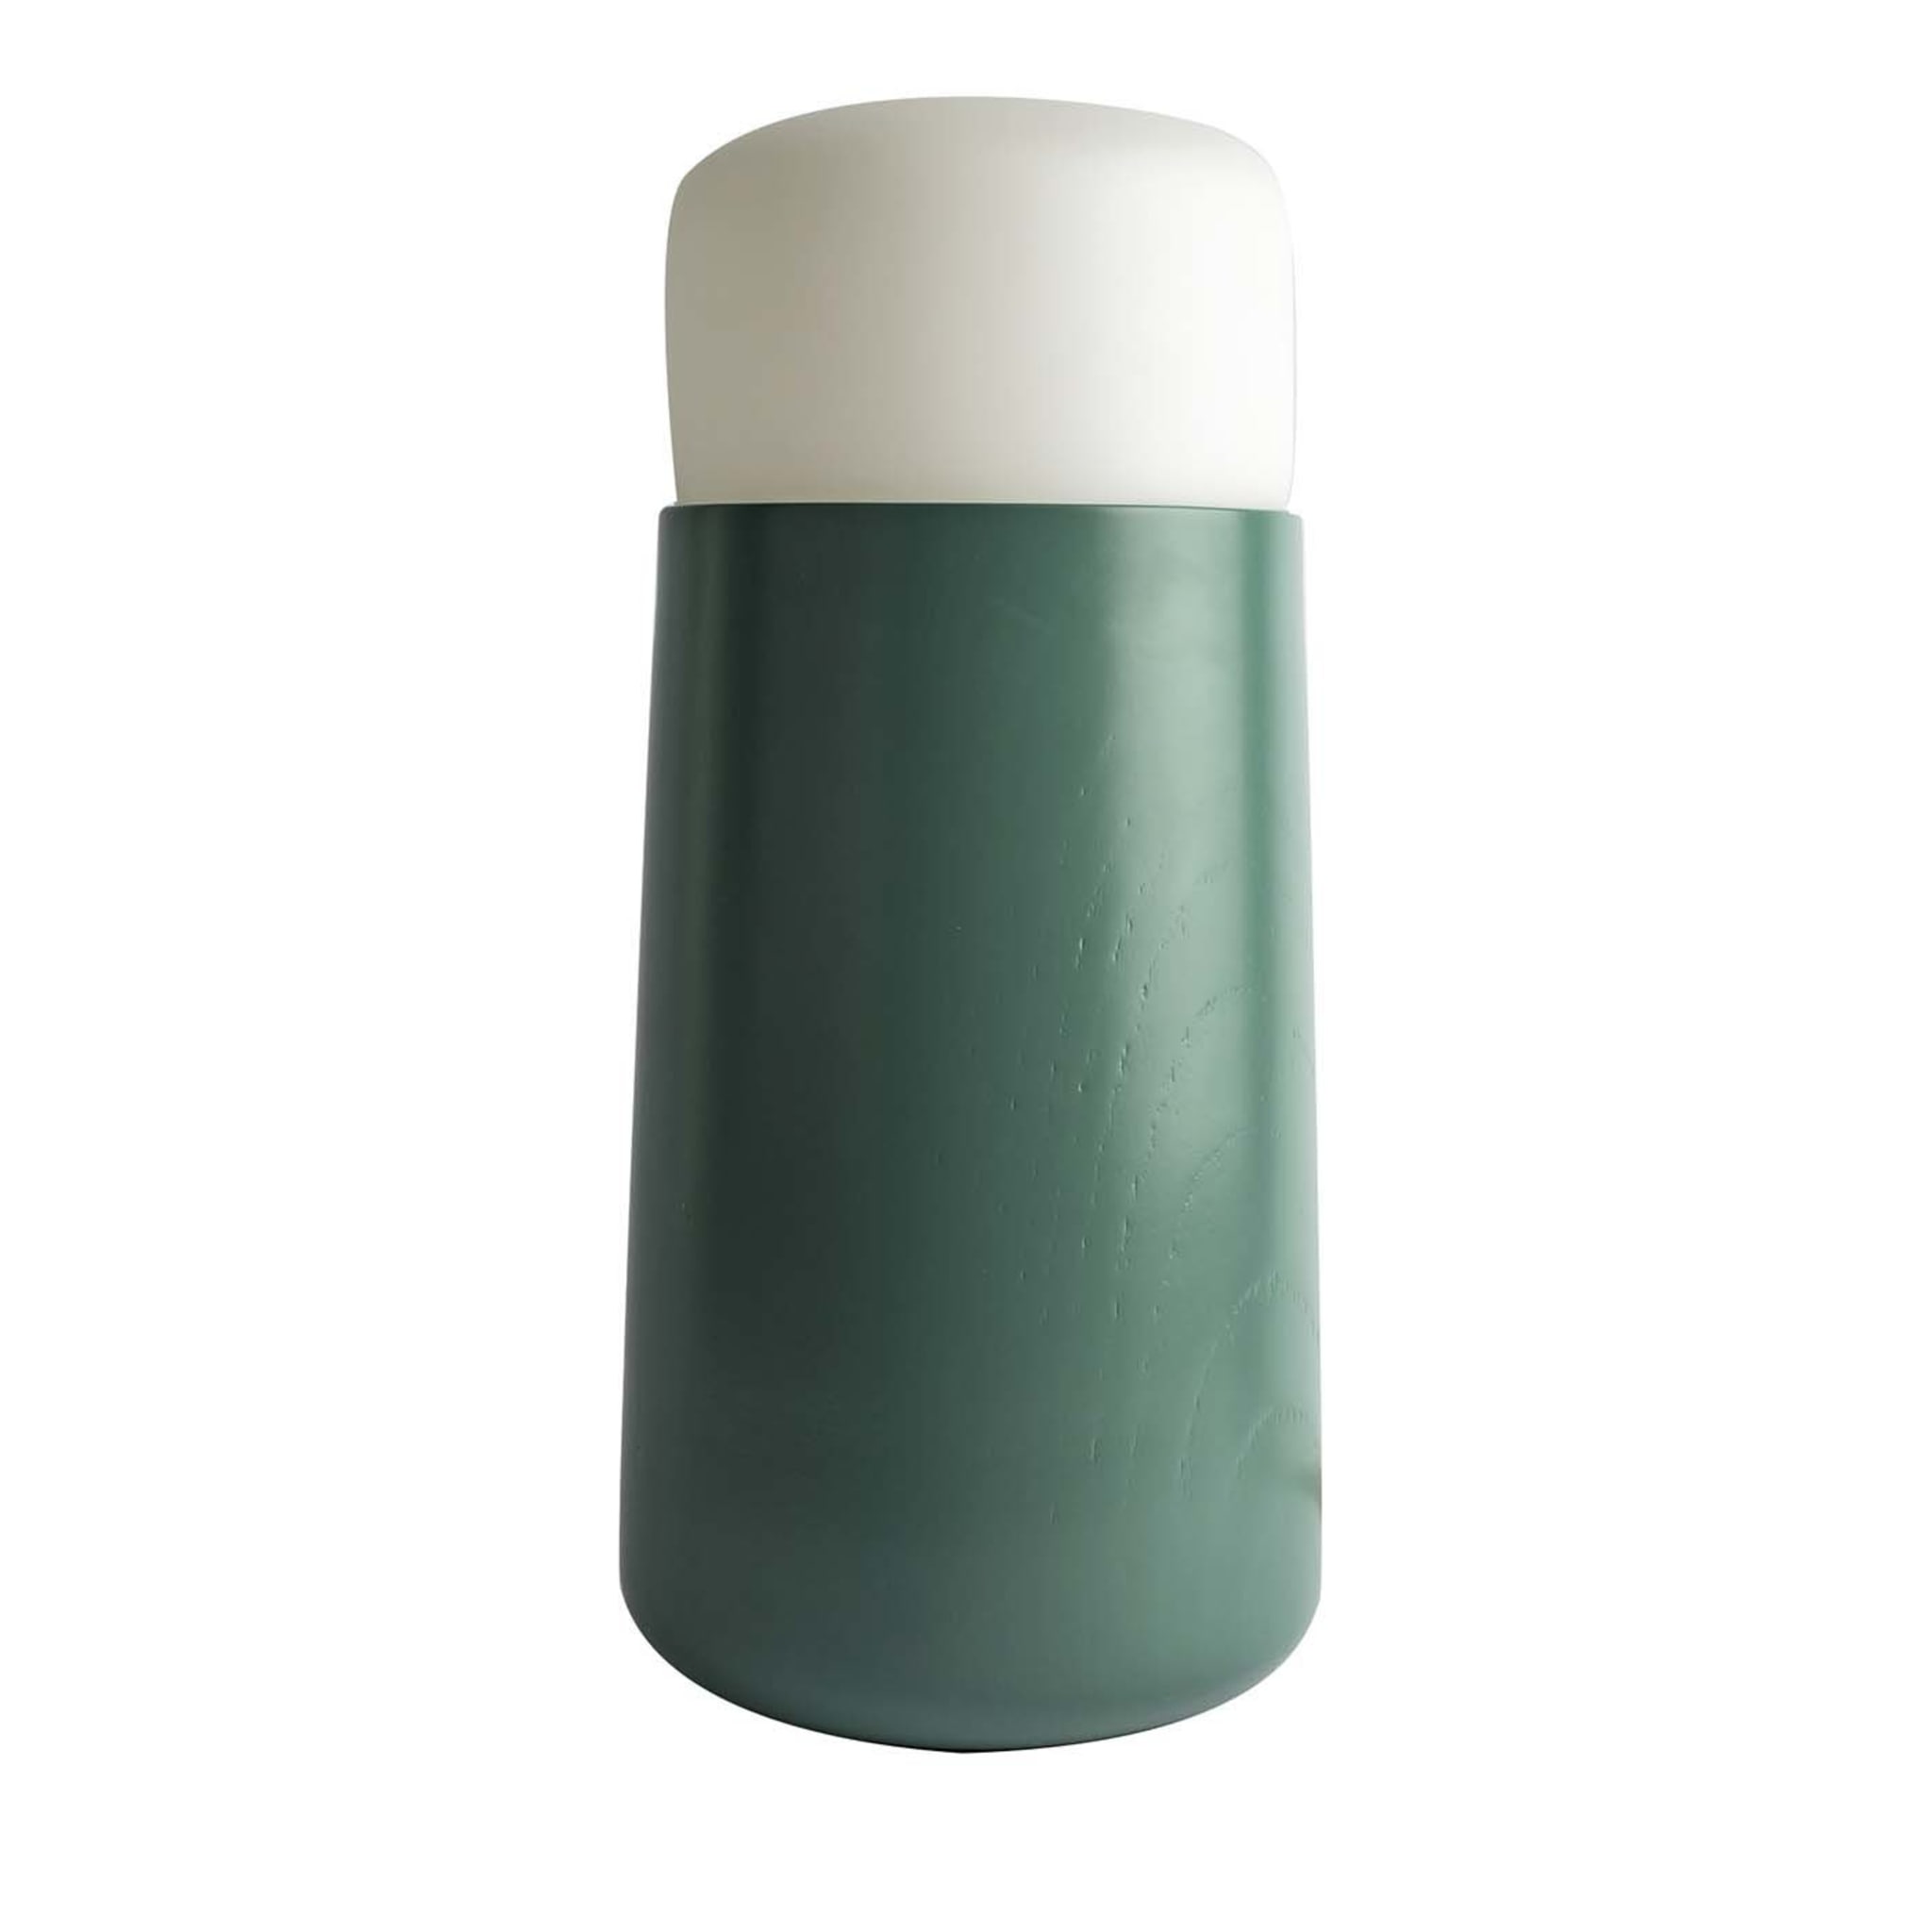 Silo Large Green Table Lamp by Alalda Design - Main view